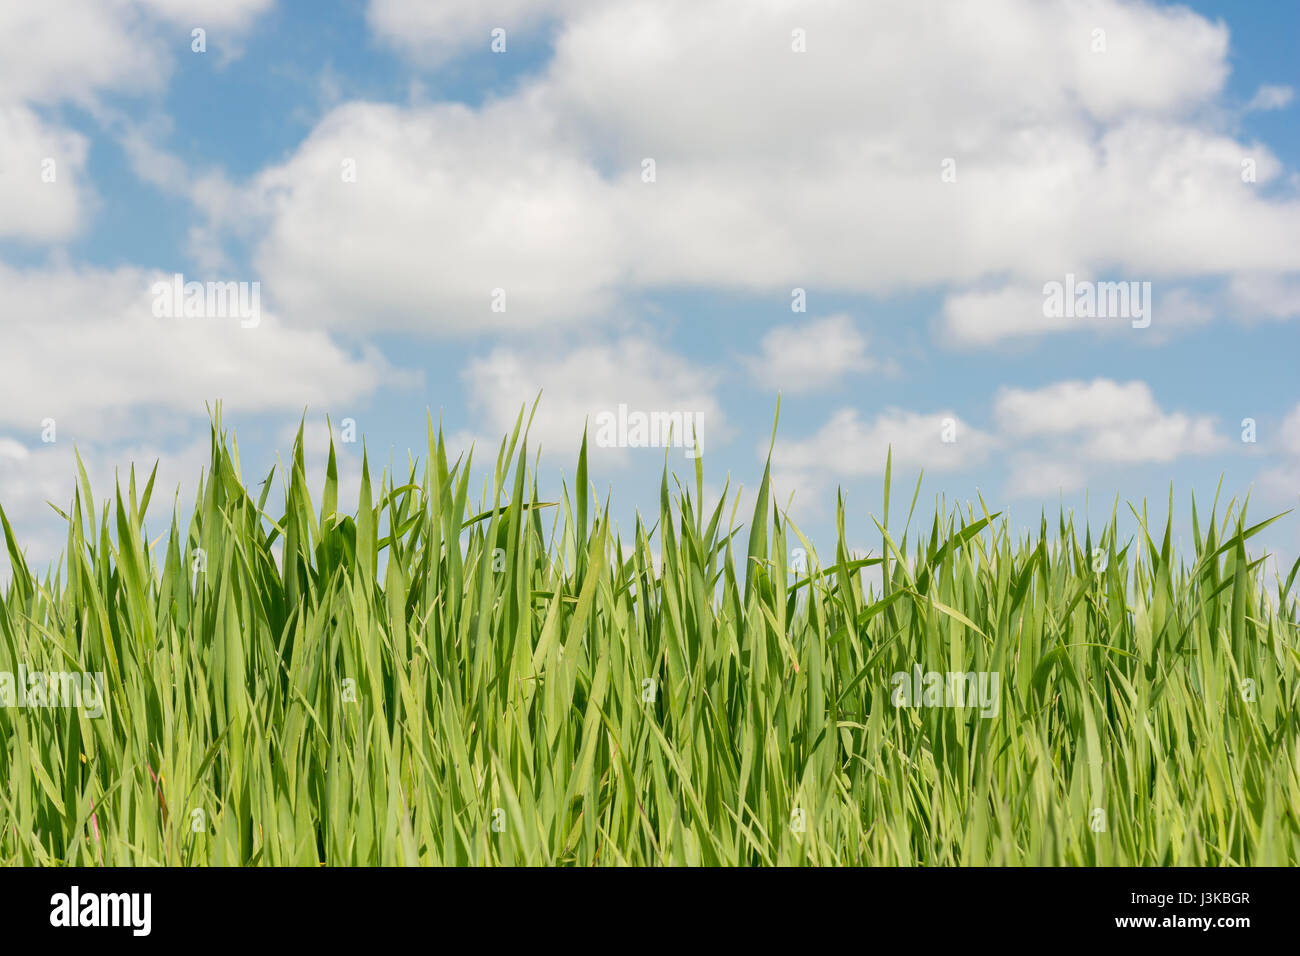 Fresh green grass shoots blue sky - metaphor for 'grass' sayings -  'Don’t Let the Grass Grow Under Your Feet, 'Head in the Clouds', economic growth. Stock Photo